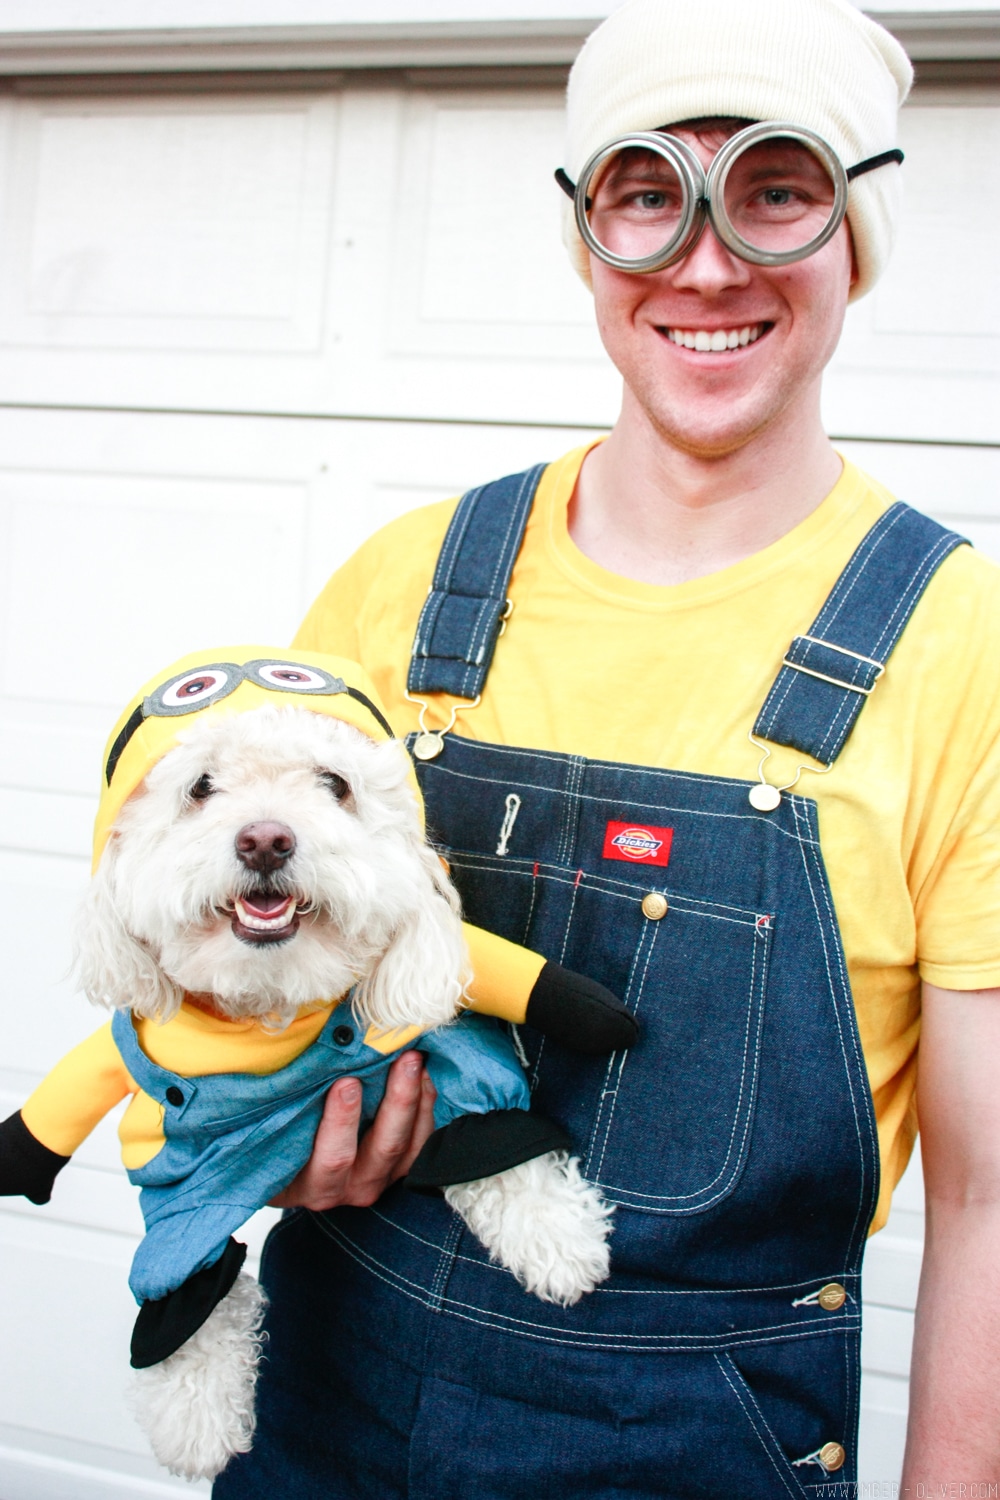 Minion costumes for the whole family! How to make your own DIY minion costumes